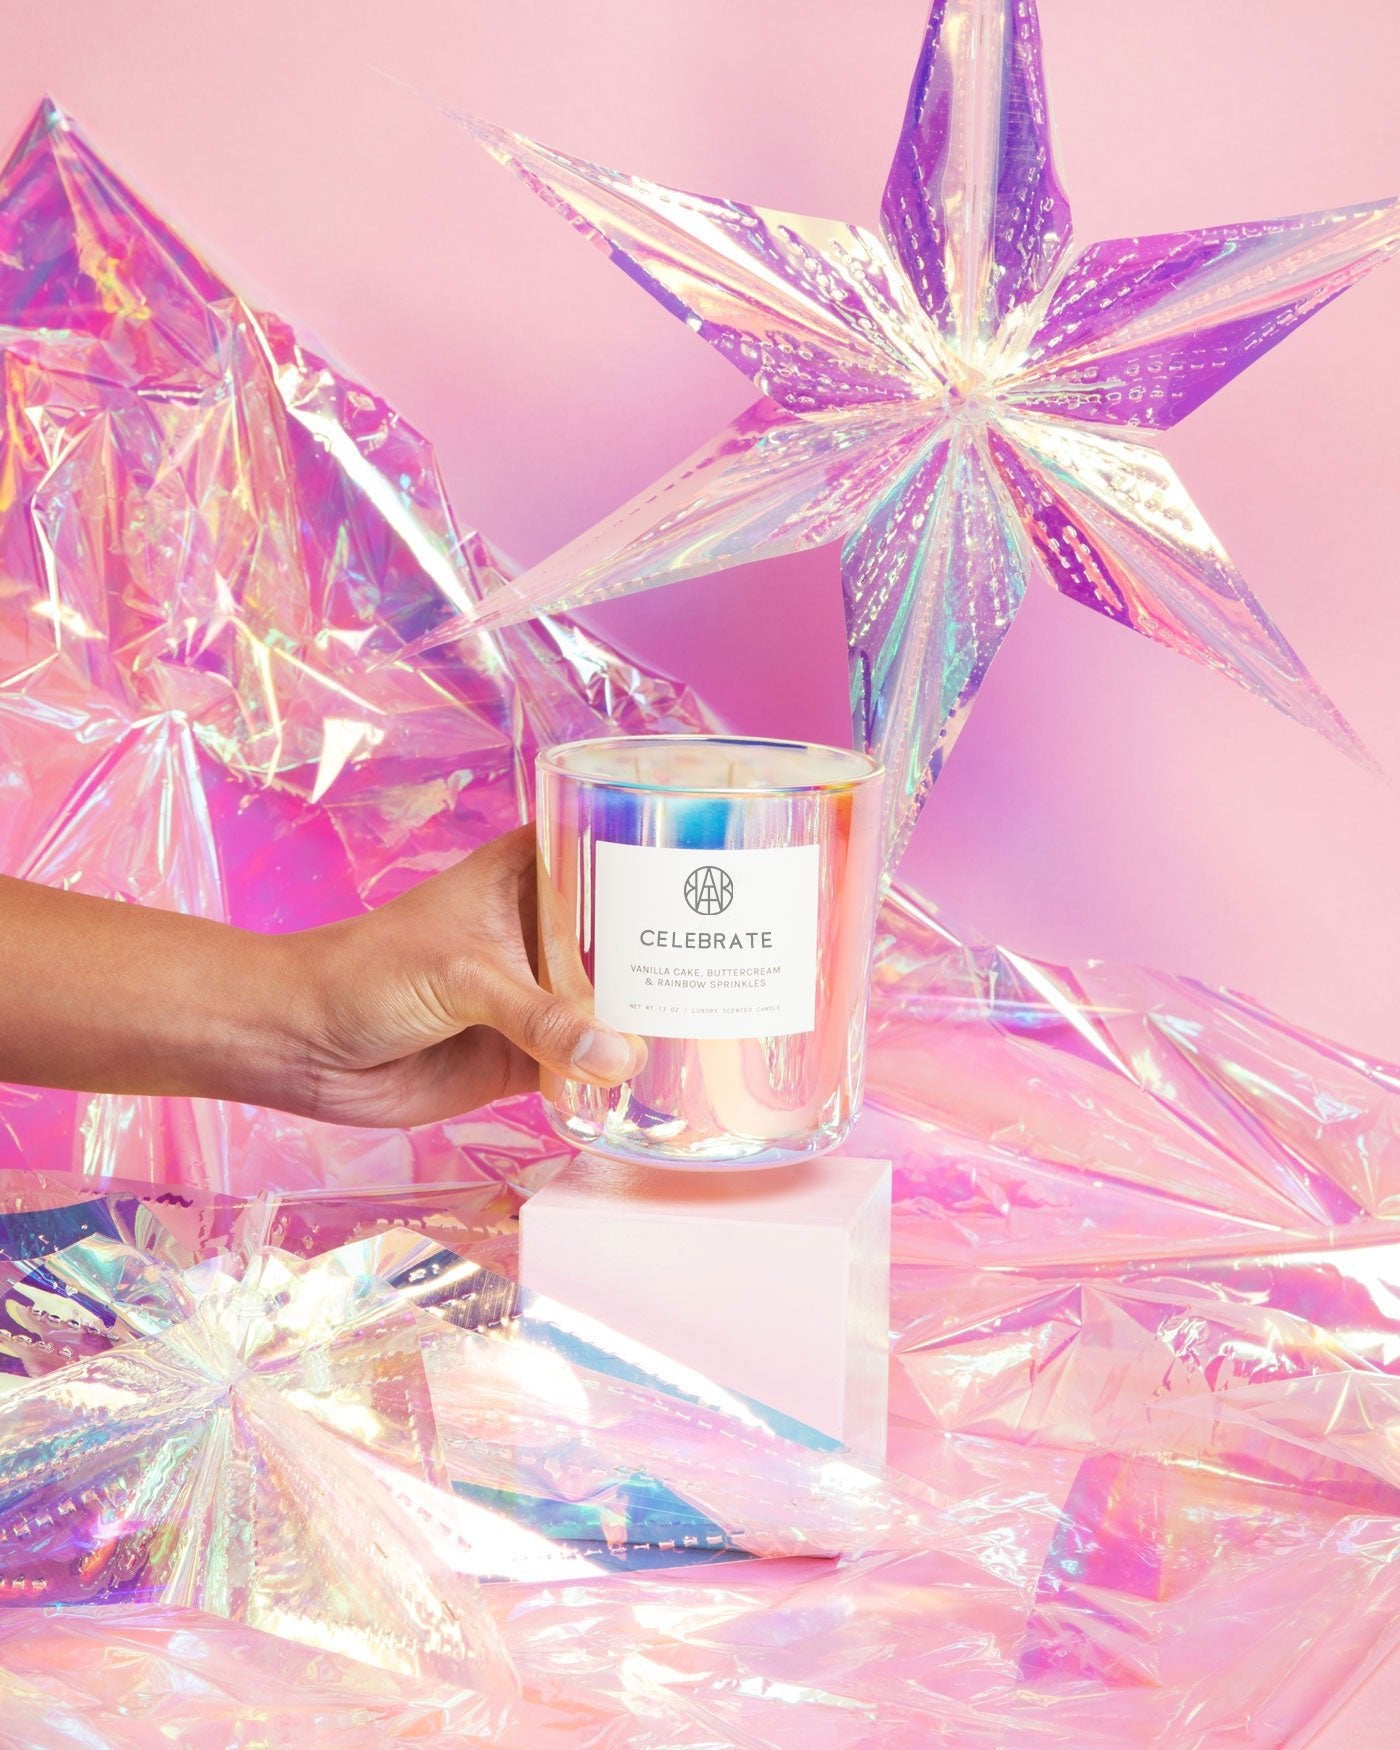 CELEBRATE - Deluxe Iridescent Candle - AEMBR - Clean Luxury Candles, Wax Melts & Laundry Care